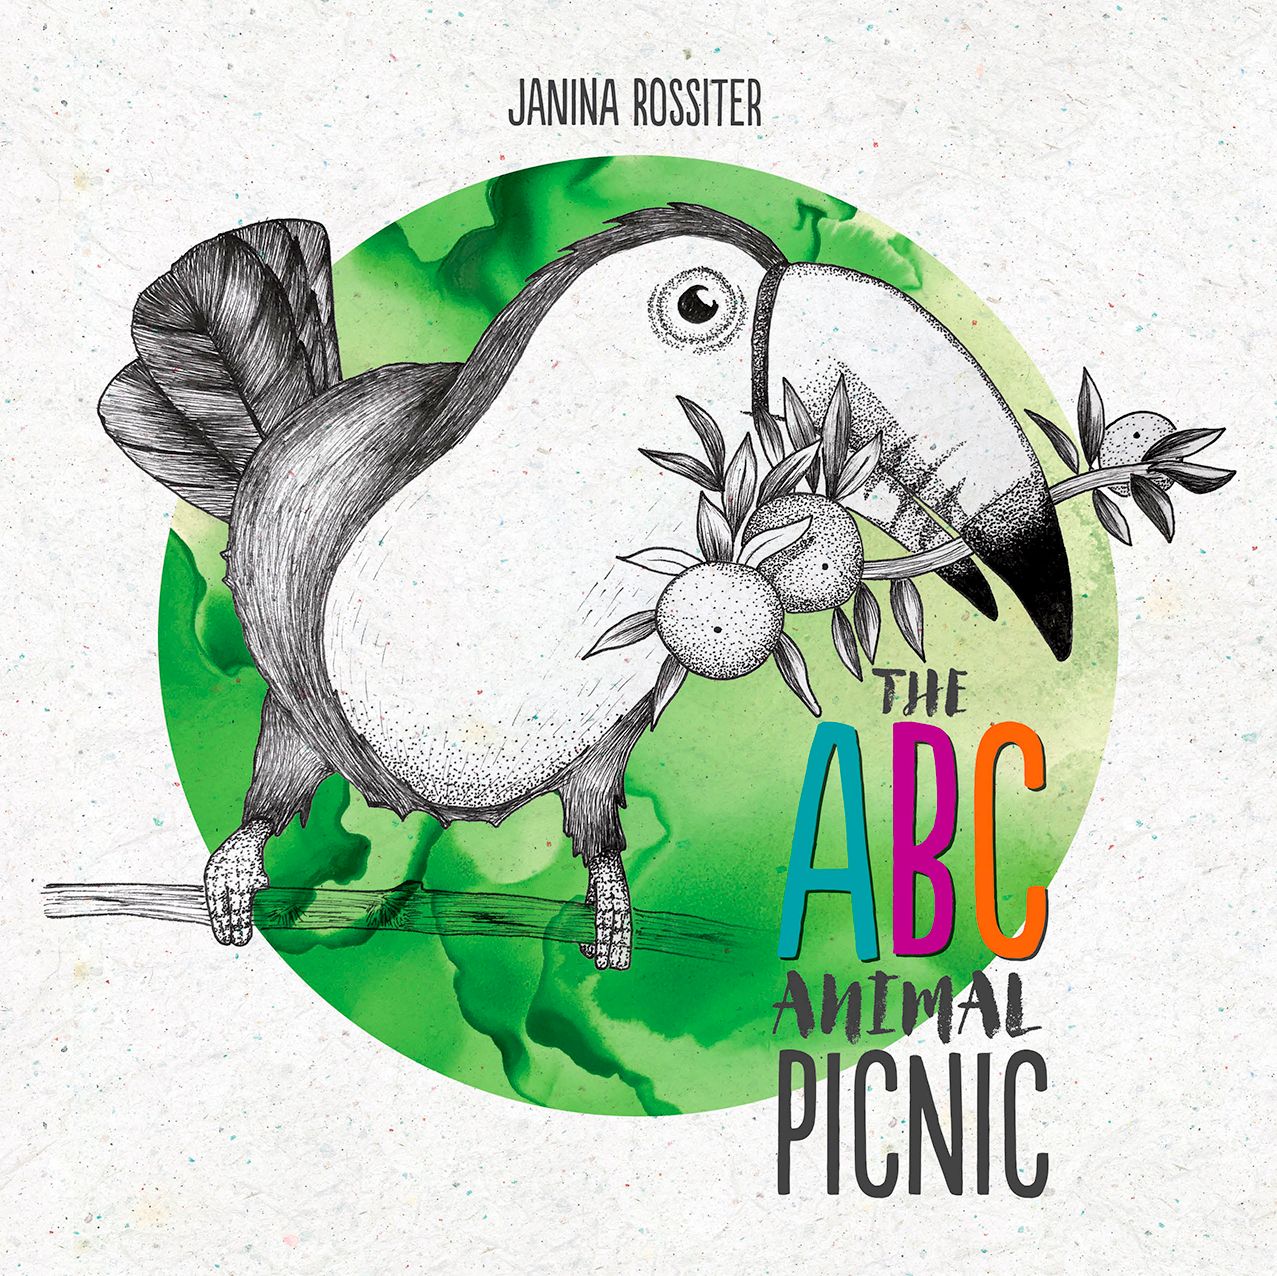 FREE: The ABC animal picnic by Janina Rossiter